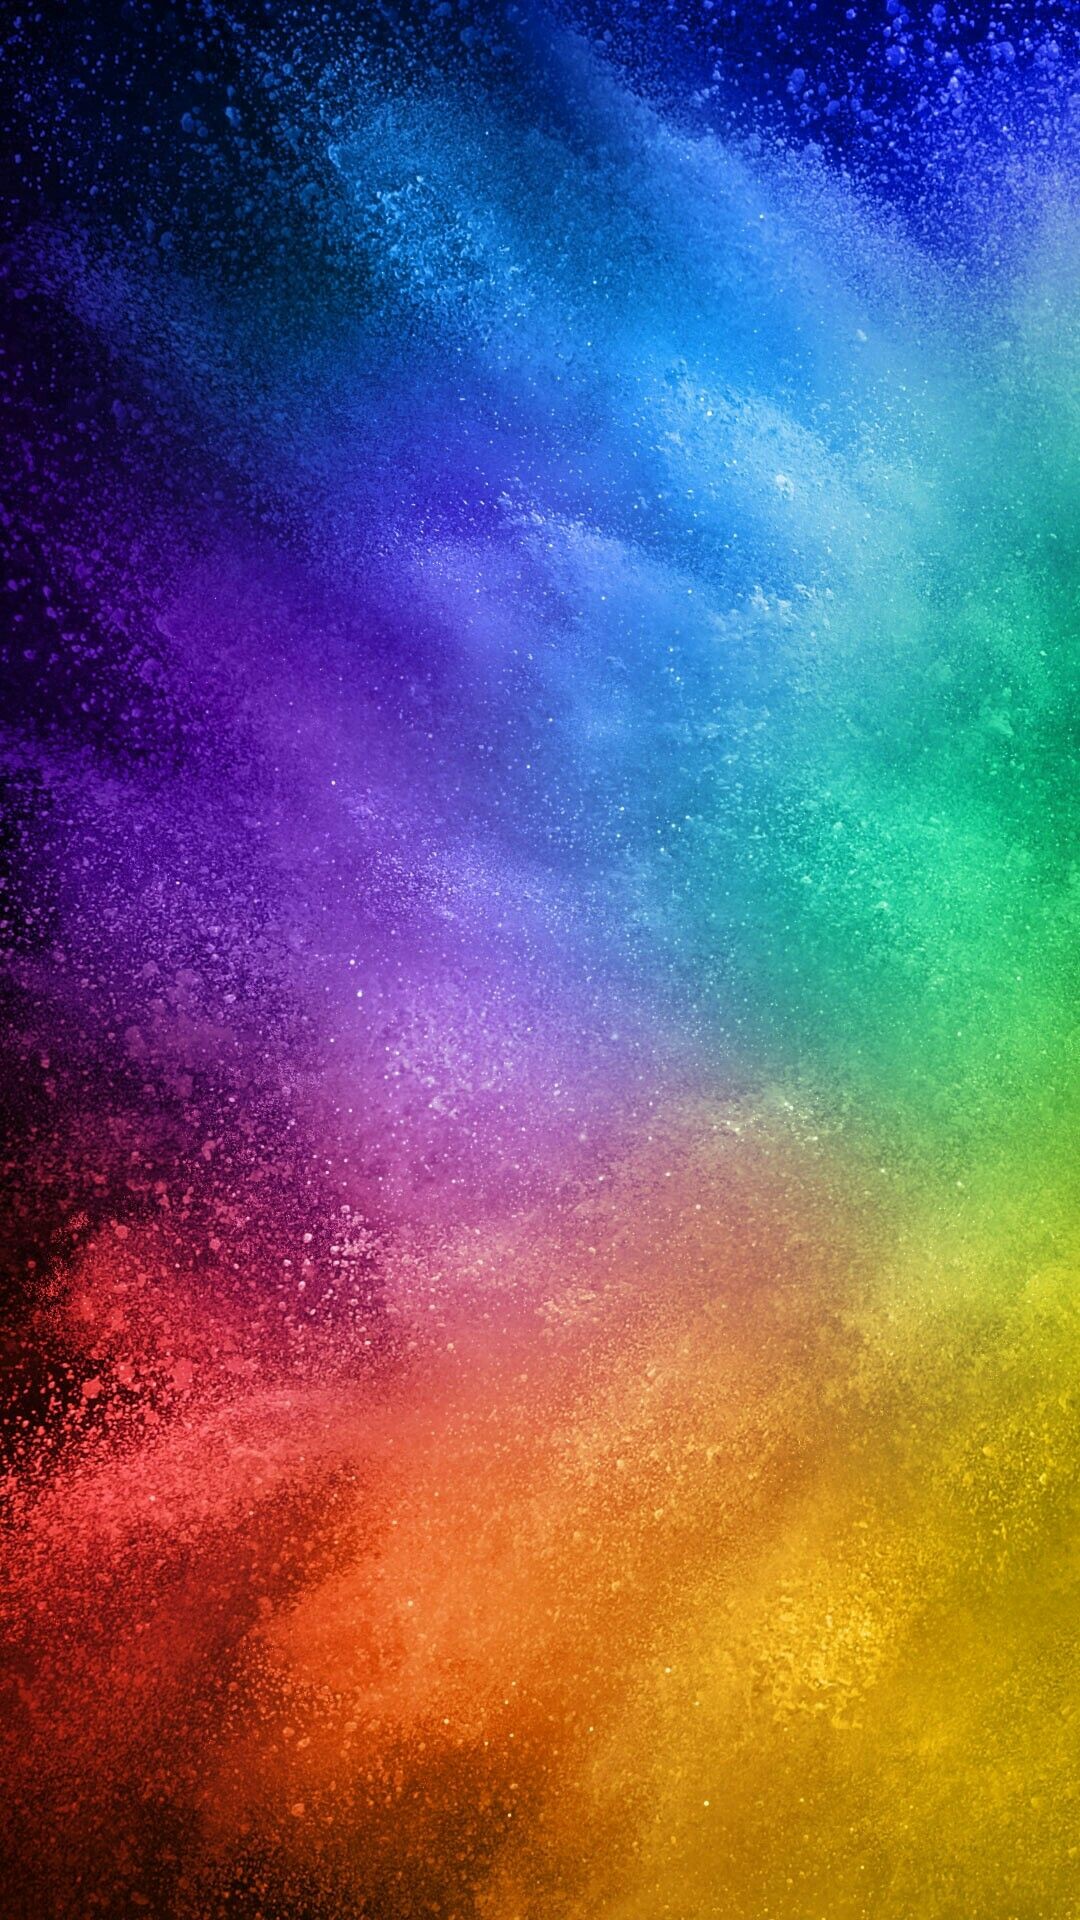 Rainbow Colors: An abstract art, Drawing, Gradient, Visualization. 1080x1920 Full HD Wallpaper.